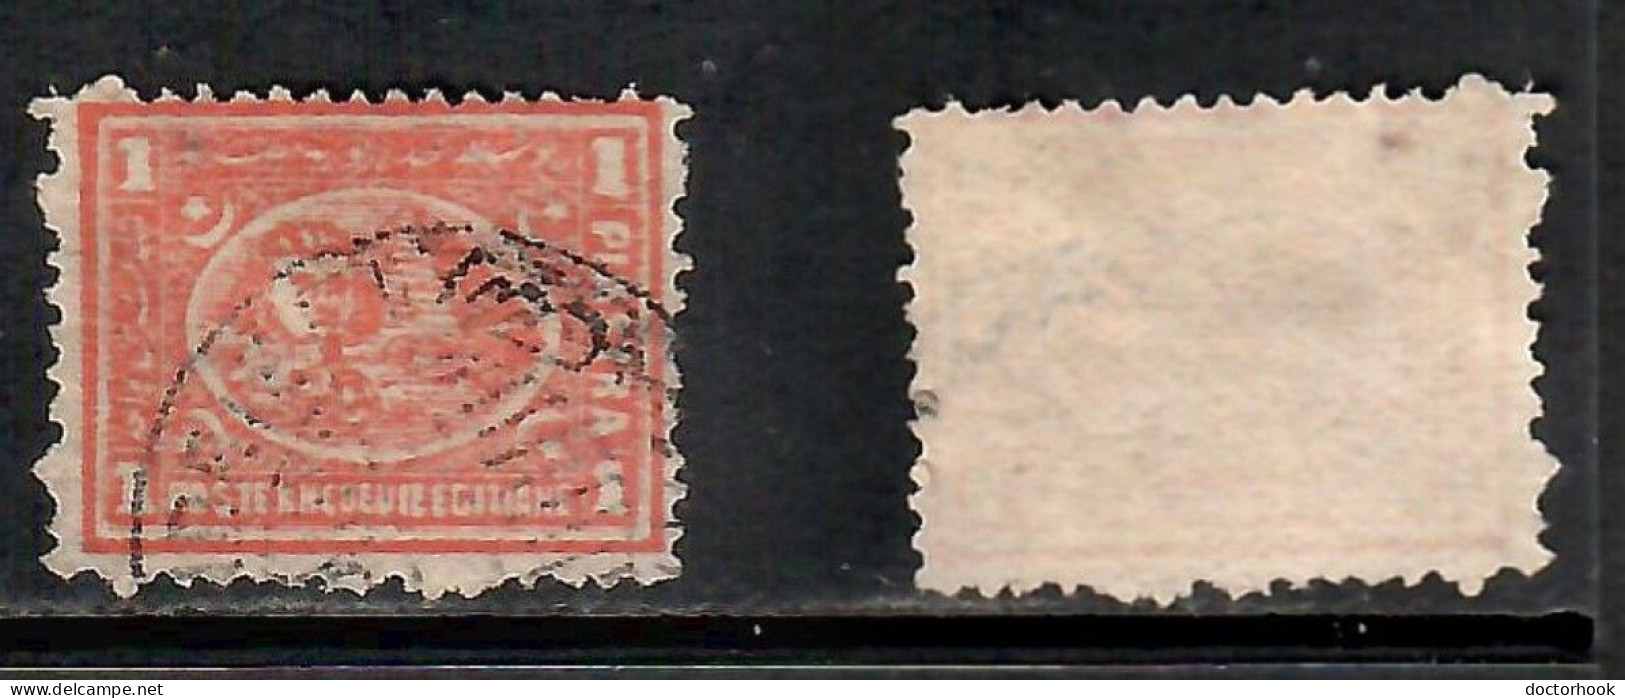 EGYPT    Scott # 22b USED (CONDITION PER SCAN) (Stamp Scan # 1036-10) - 1866-1914 Khedivate Of Egypt